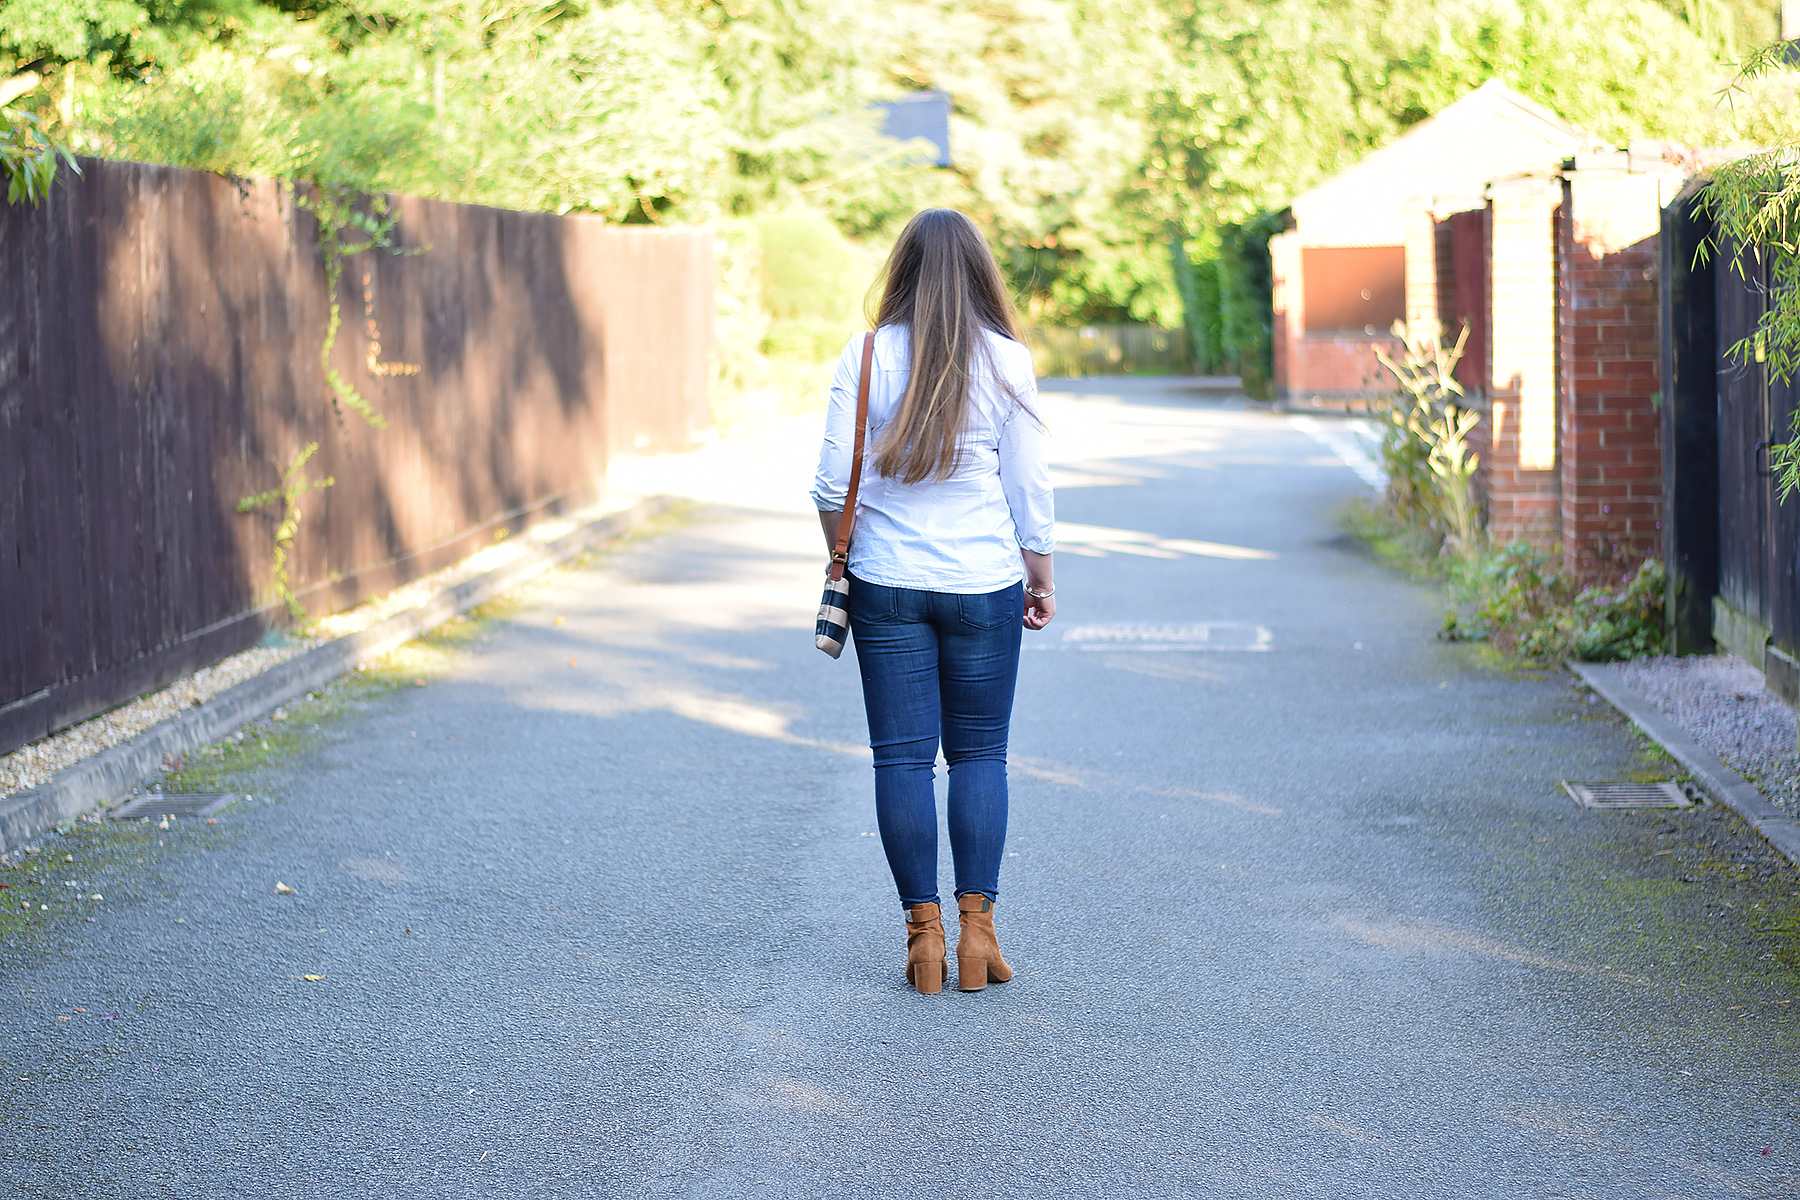 Tan ankle boots with jeans and white shirt